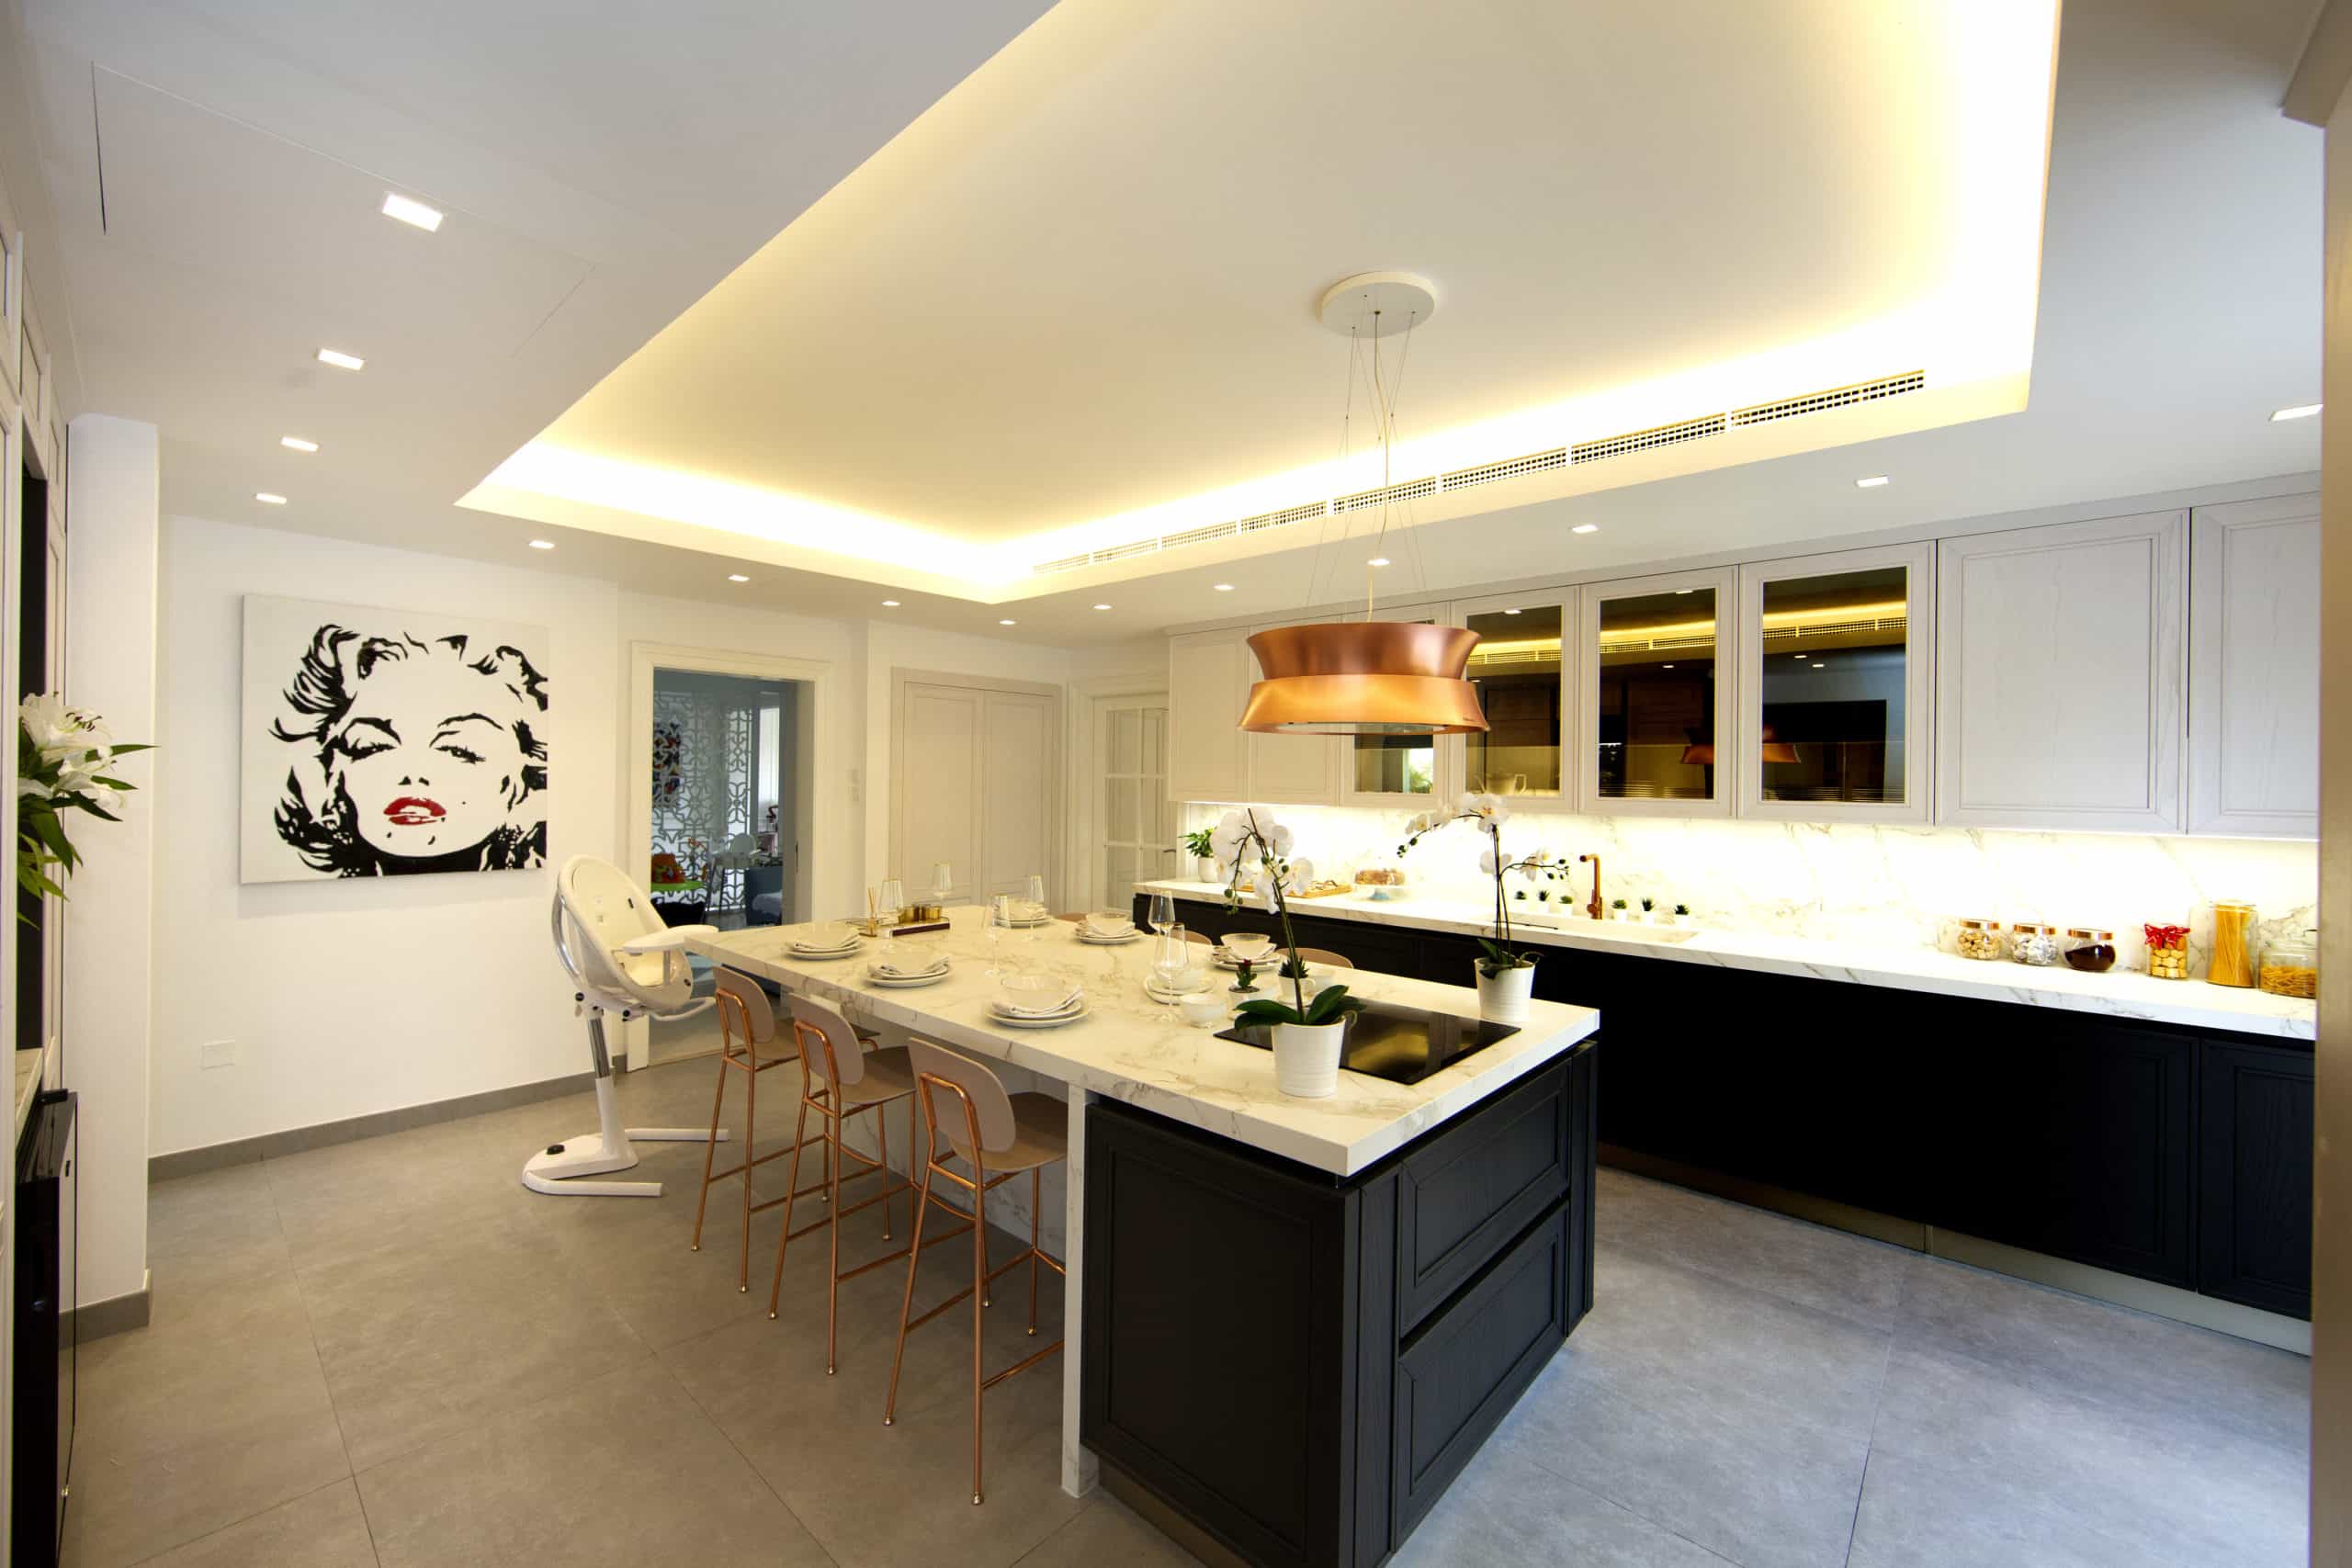 This Celebrity Kitchen By Tabbaa Kitchens Is On Our Wish List Interior Design Saudi